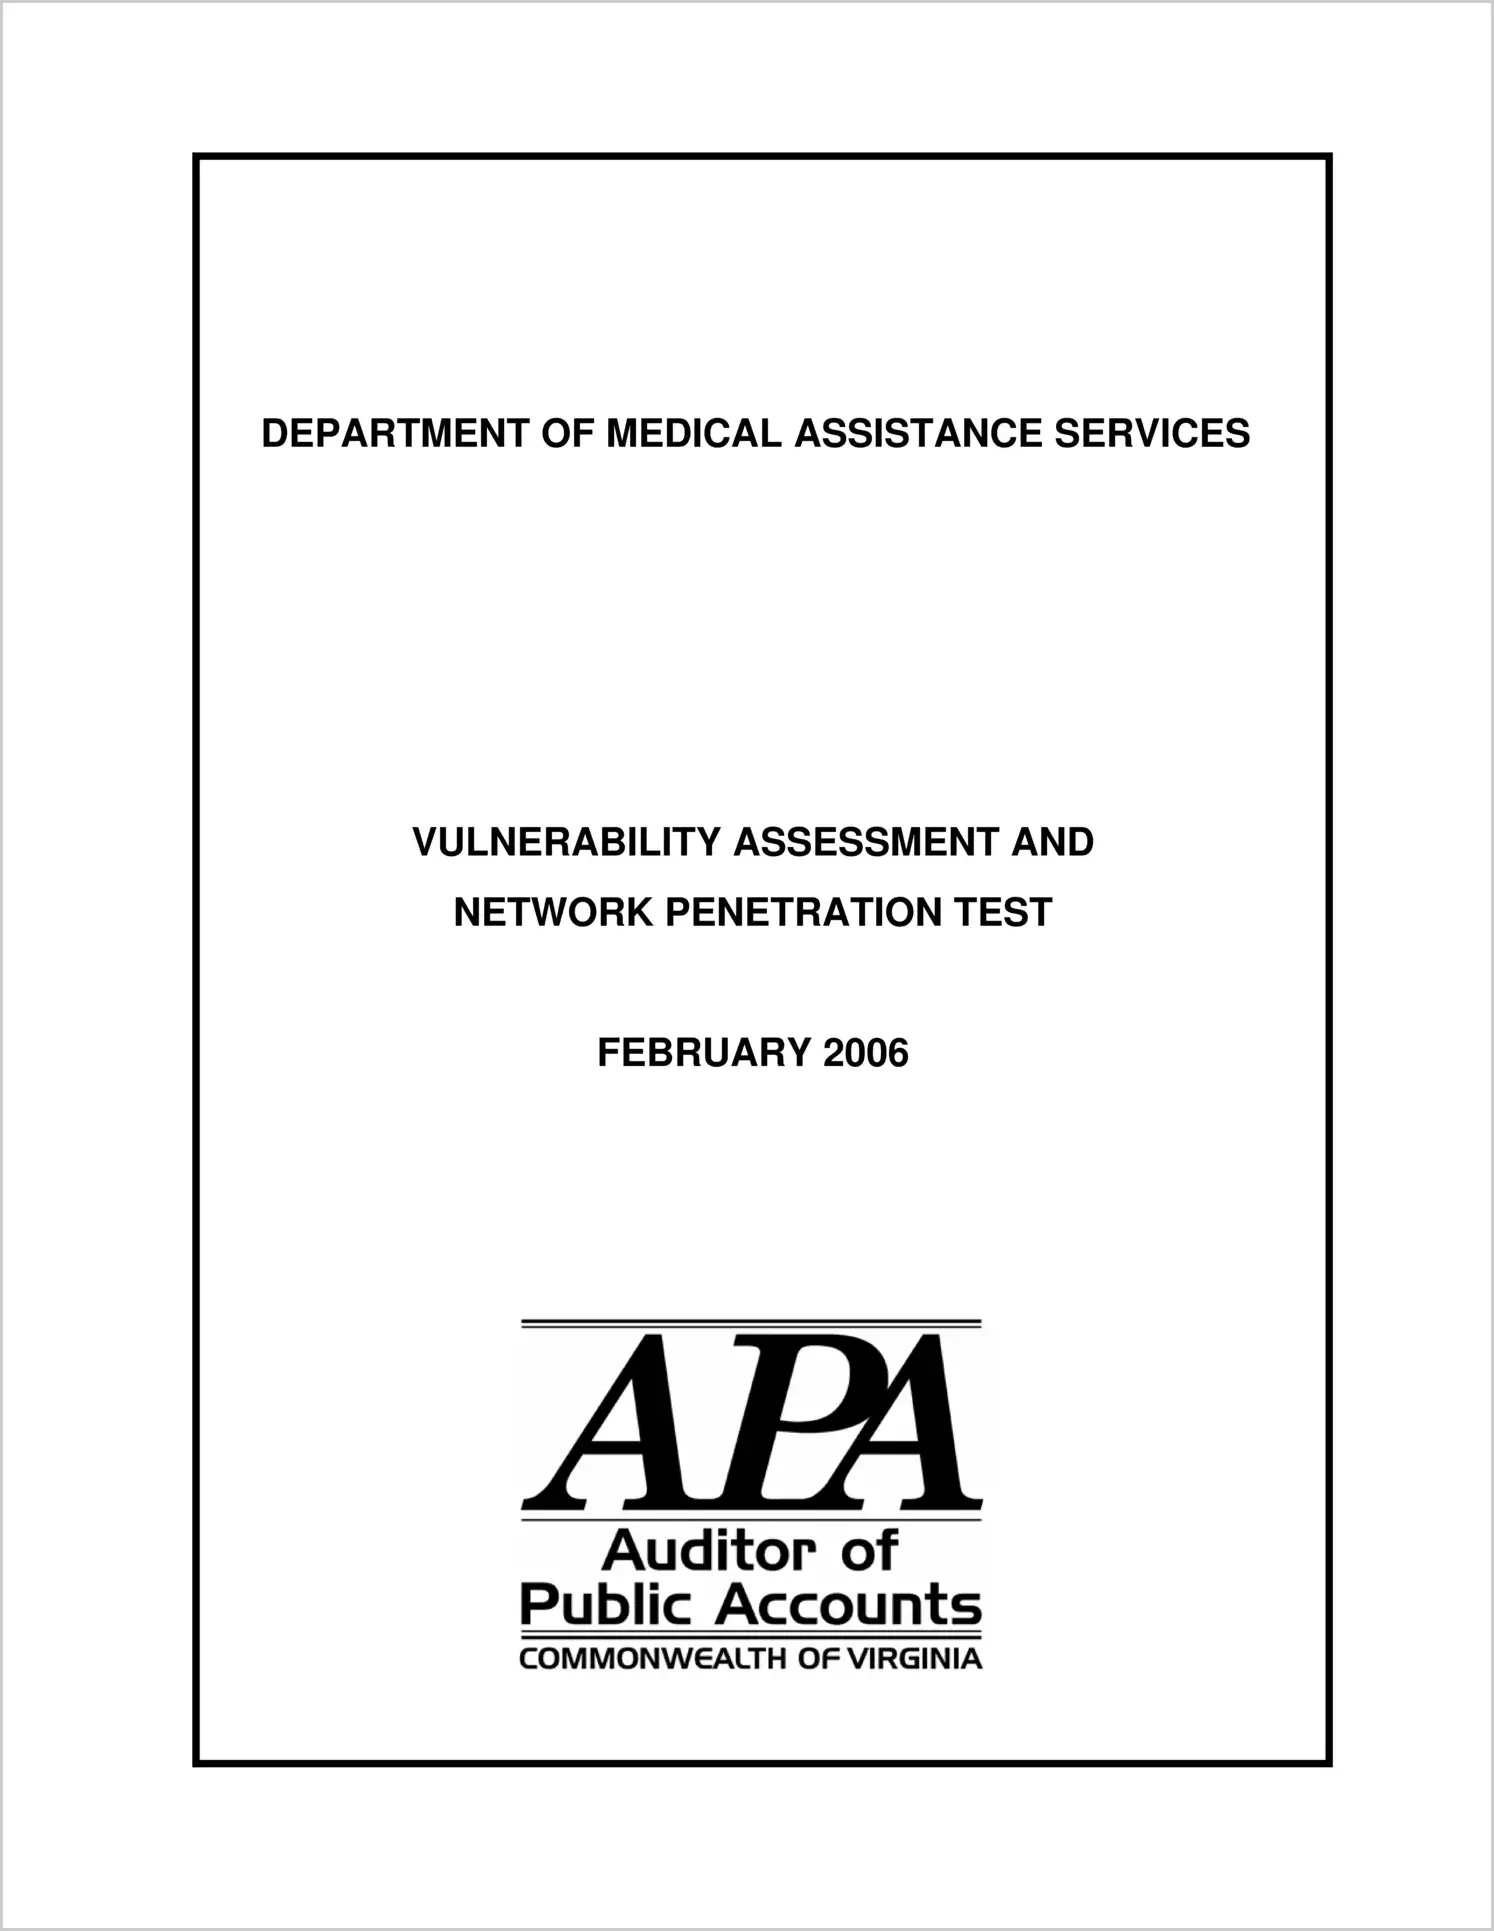 Special ReportDepartment of Medical Assistance Services Vulnerability Assessment and Network Penetration Test(Report Date: 2/06)